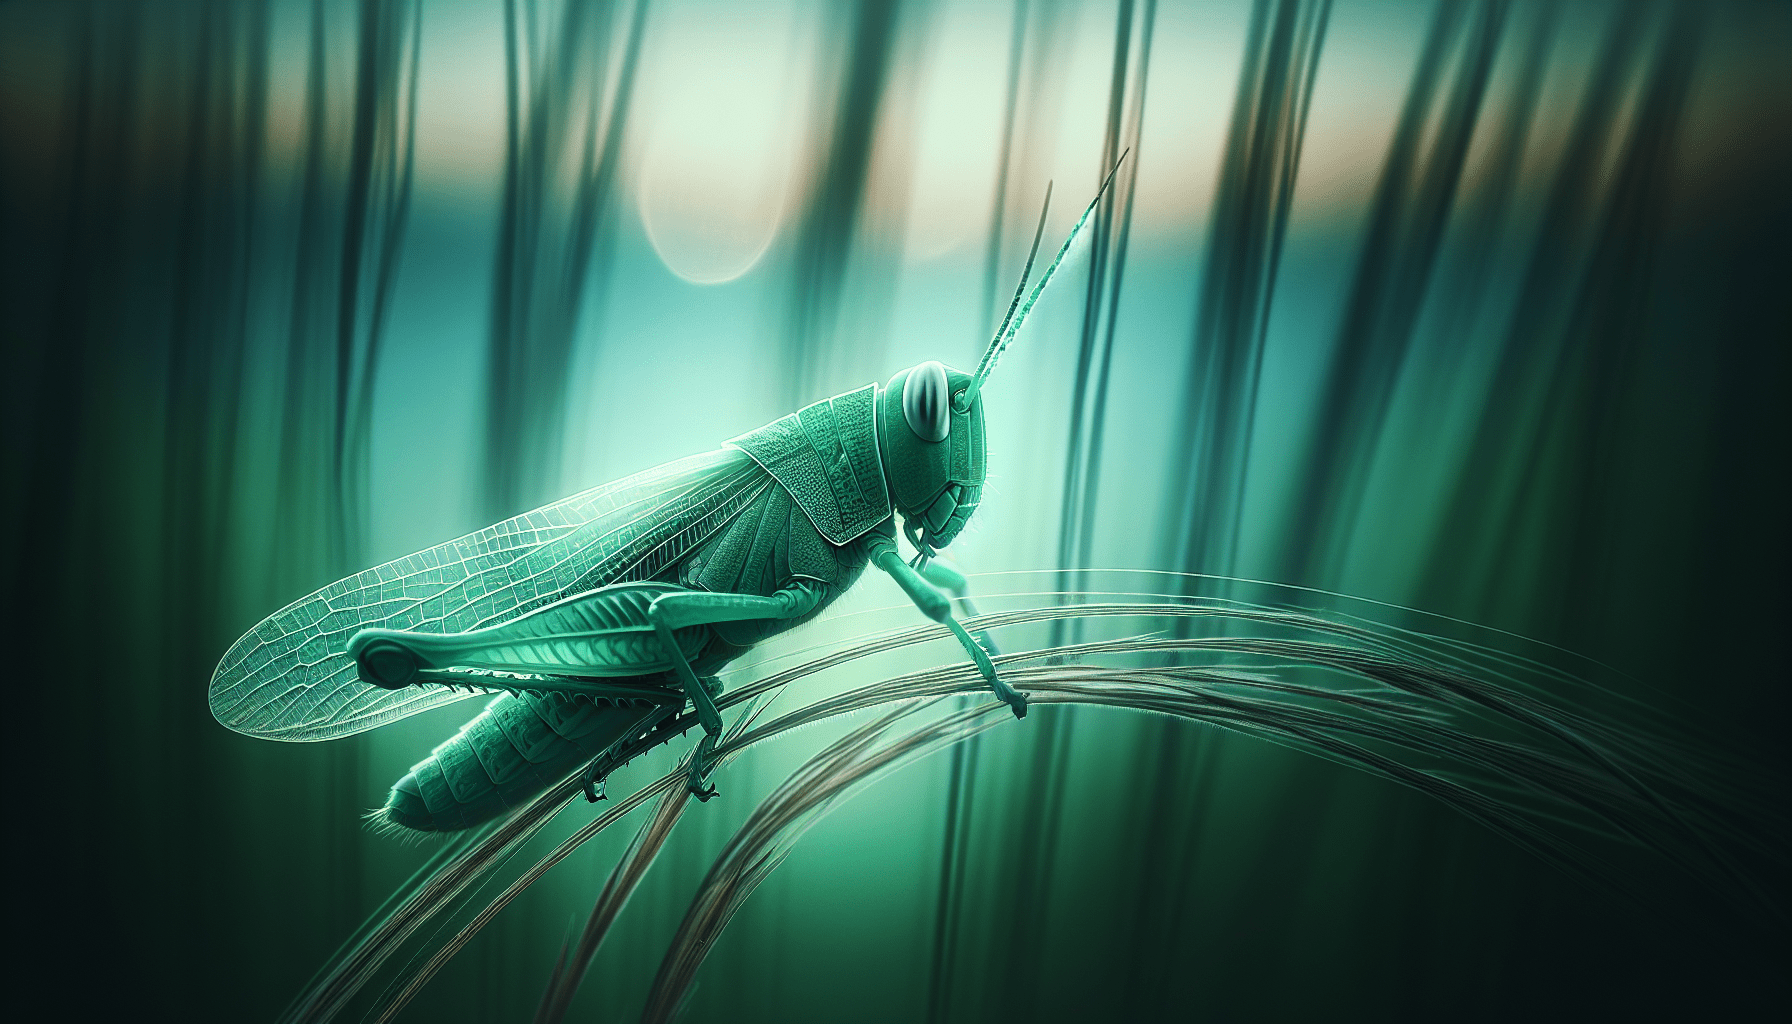 Exploring The Spiritual Meaning Of Grasshoppers